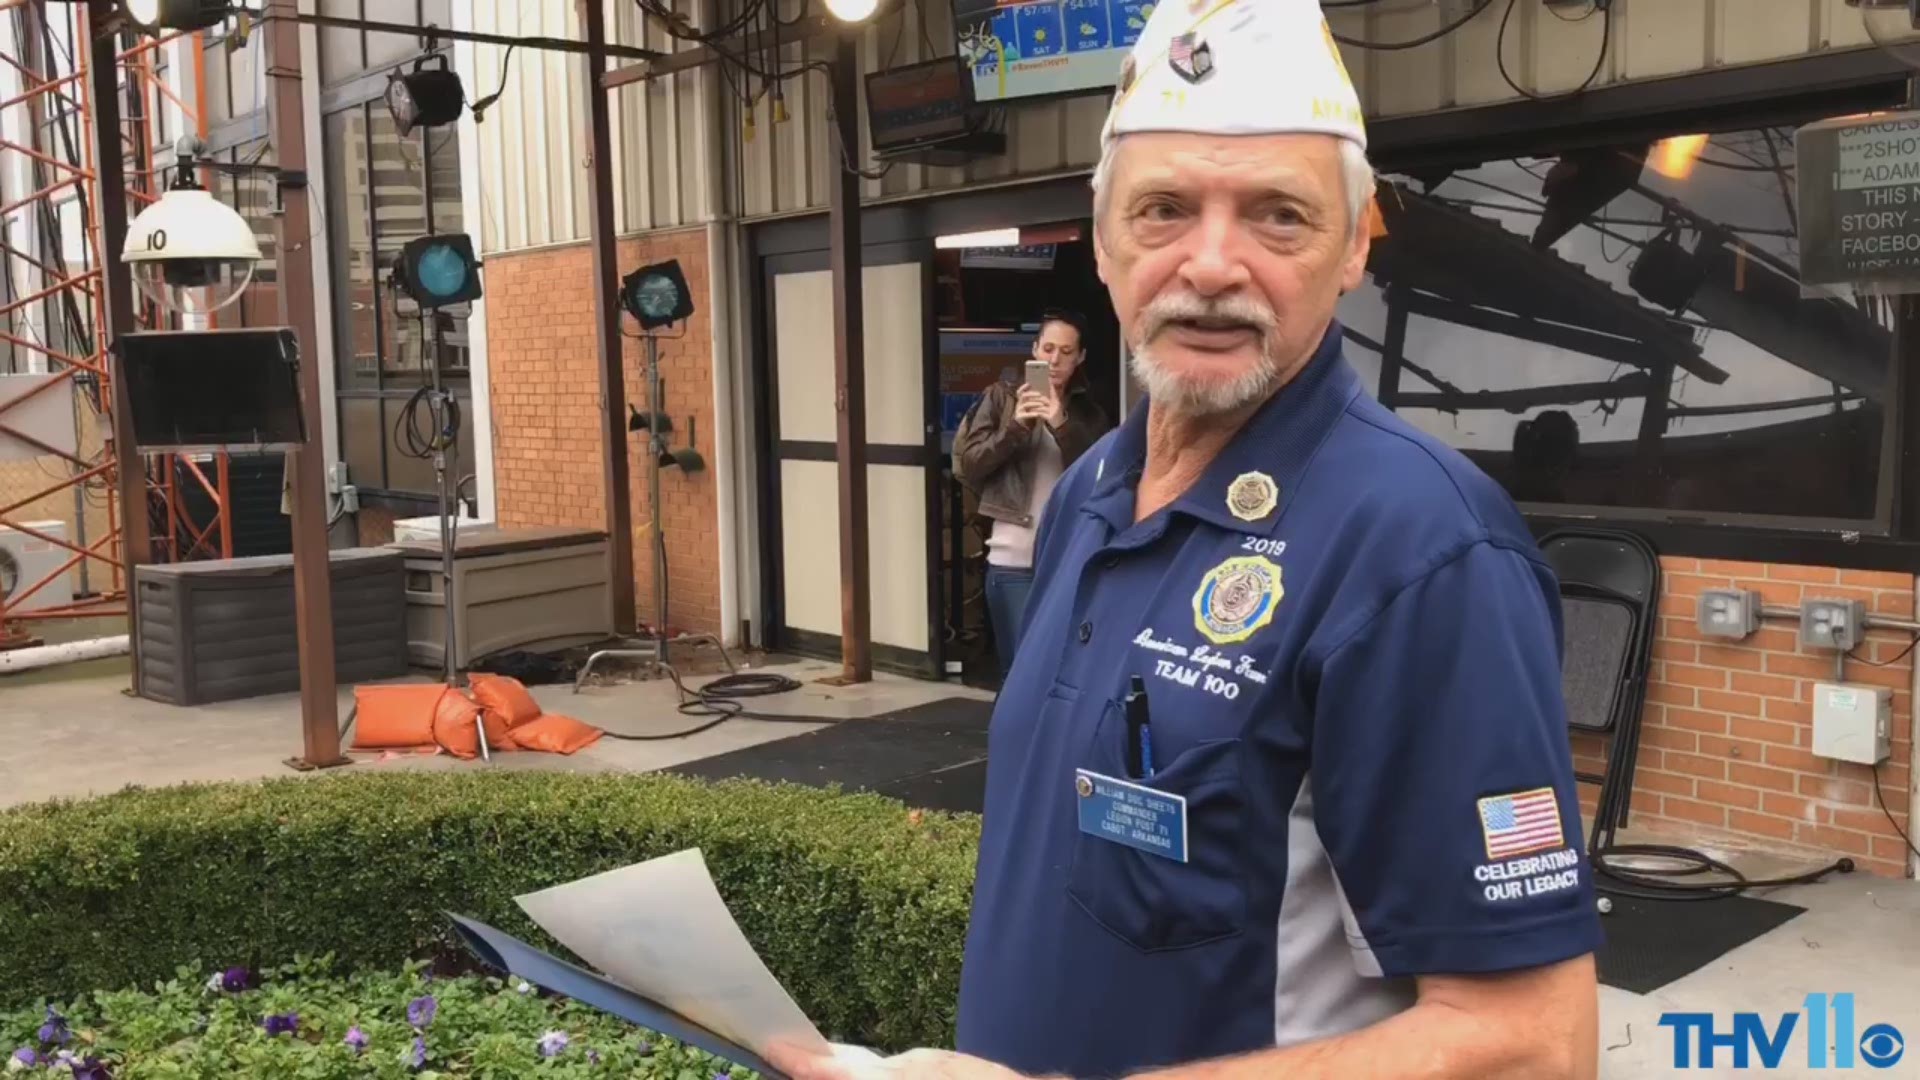 Craig O'Neill got a visit from from the American Legion, an organization of war veterans, and even became an honorary member! KTHV and Craig also received Certificates of Appreciation for their continued support.